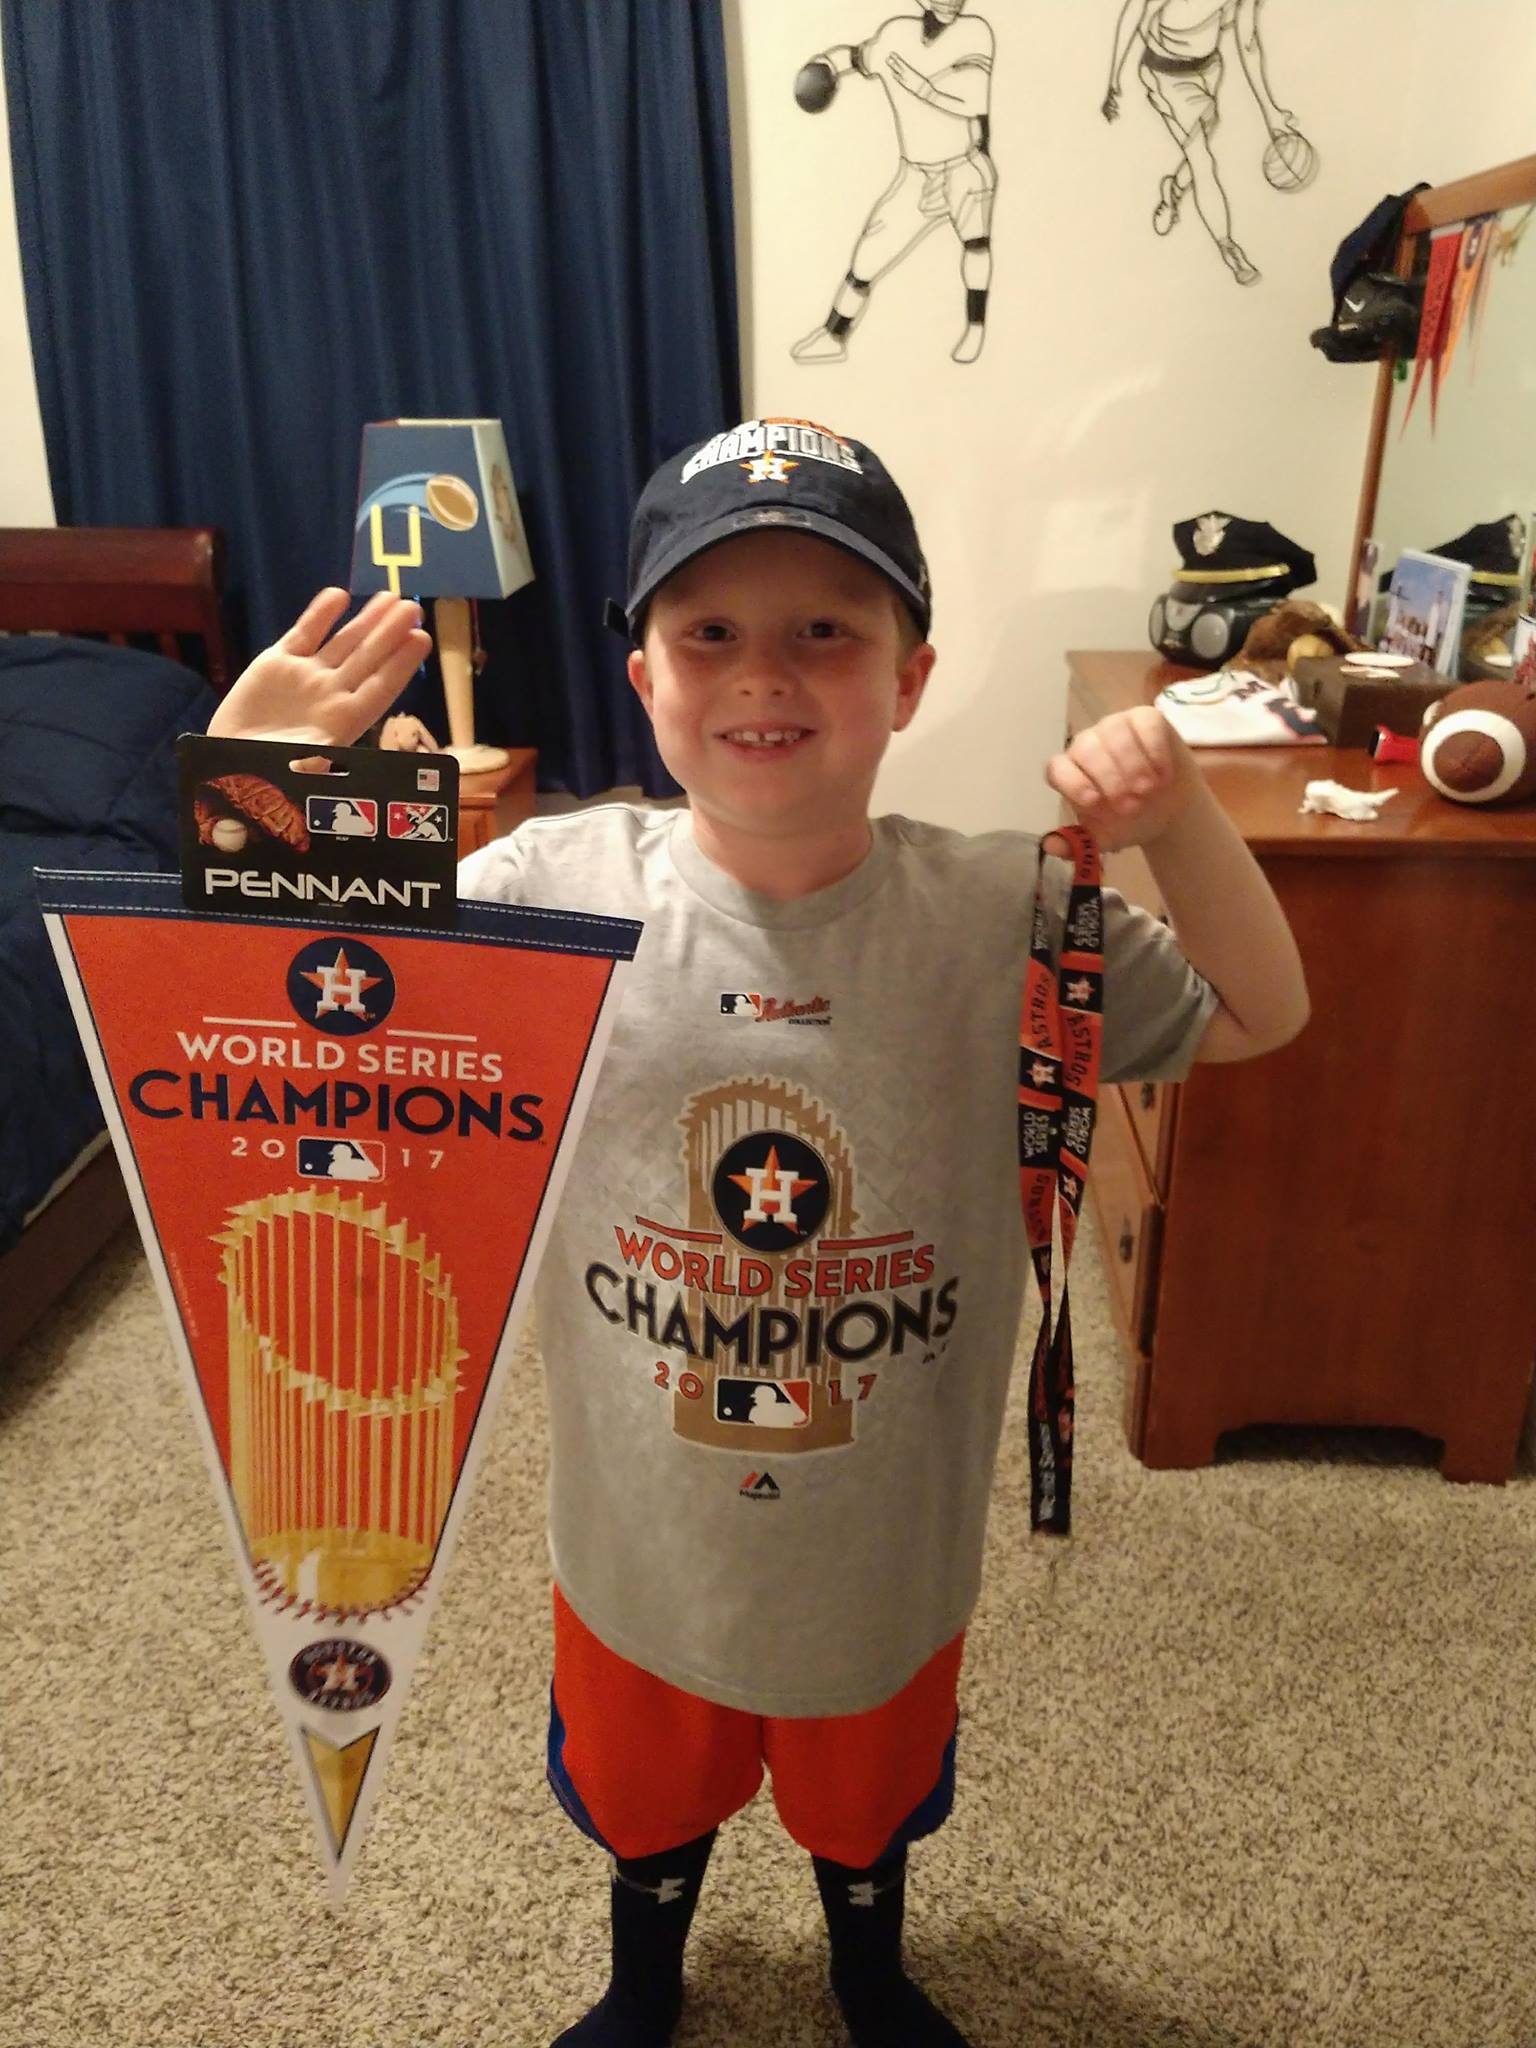 Houston Astros 'Gold Rush' merchandise event: Thousands of fans line up at  midnight